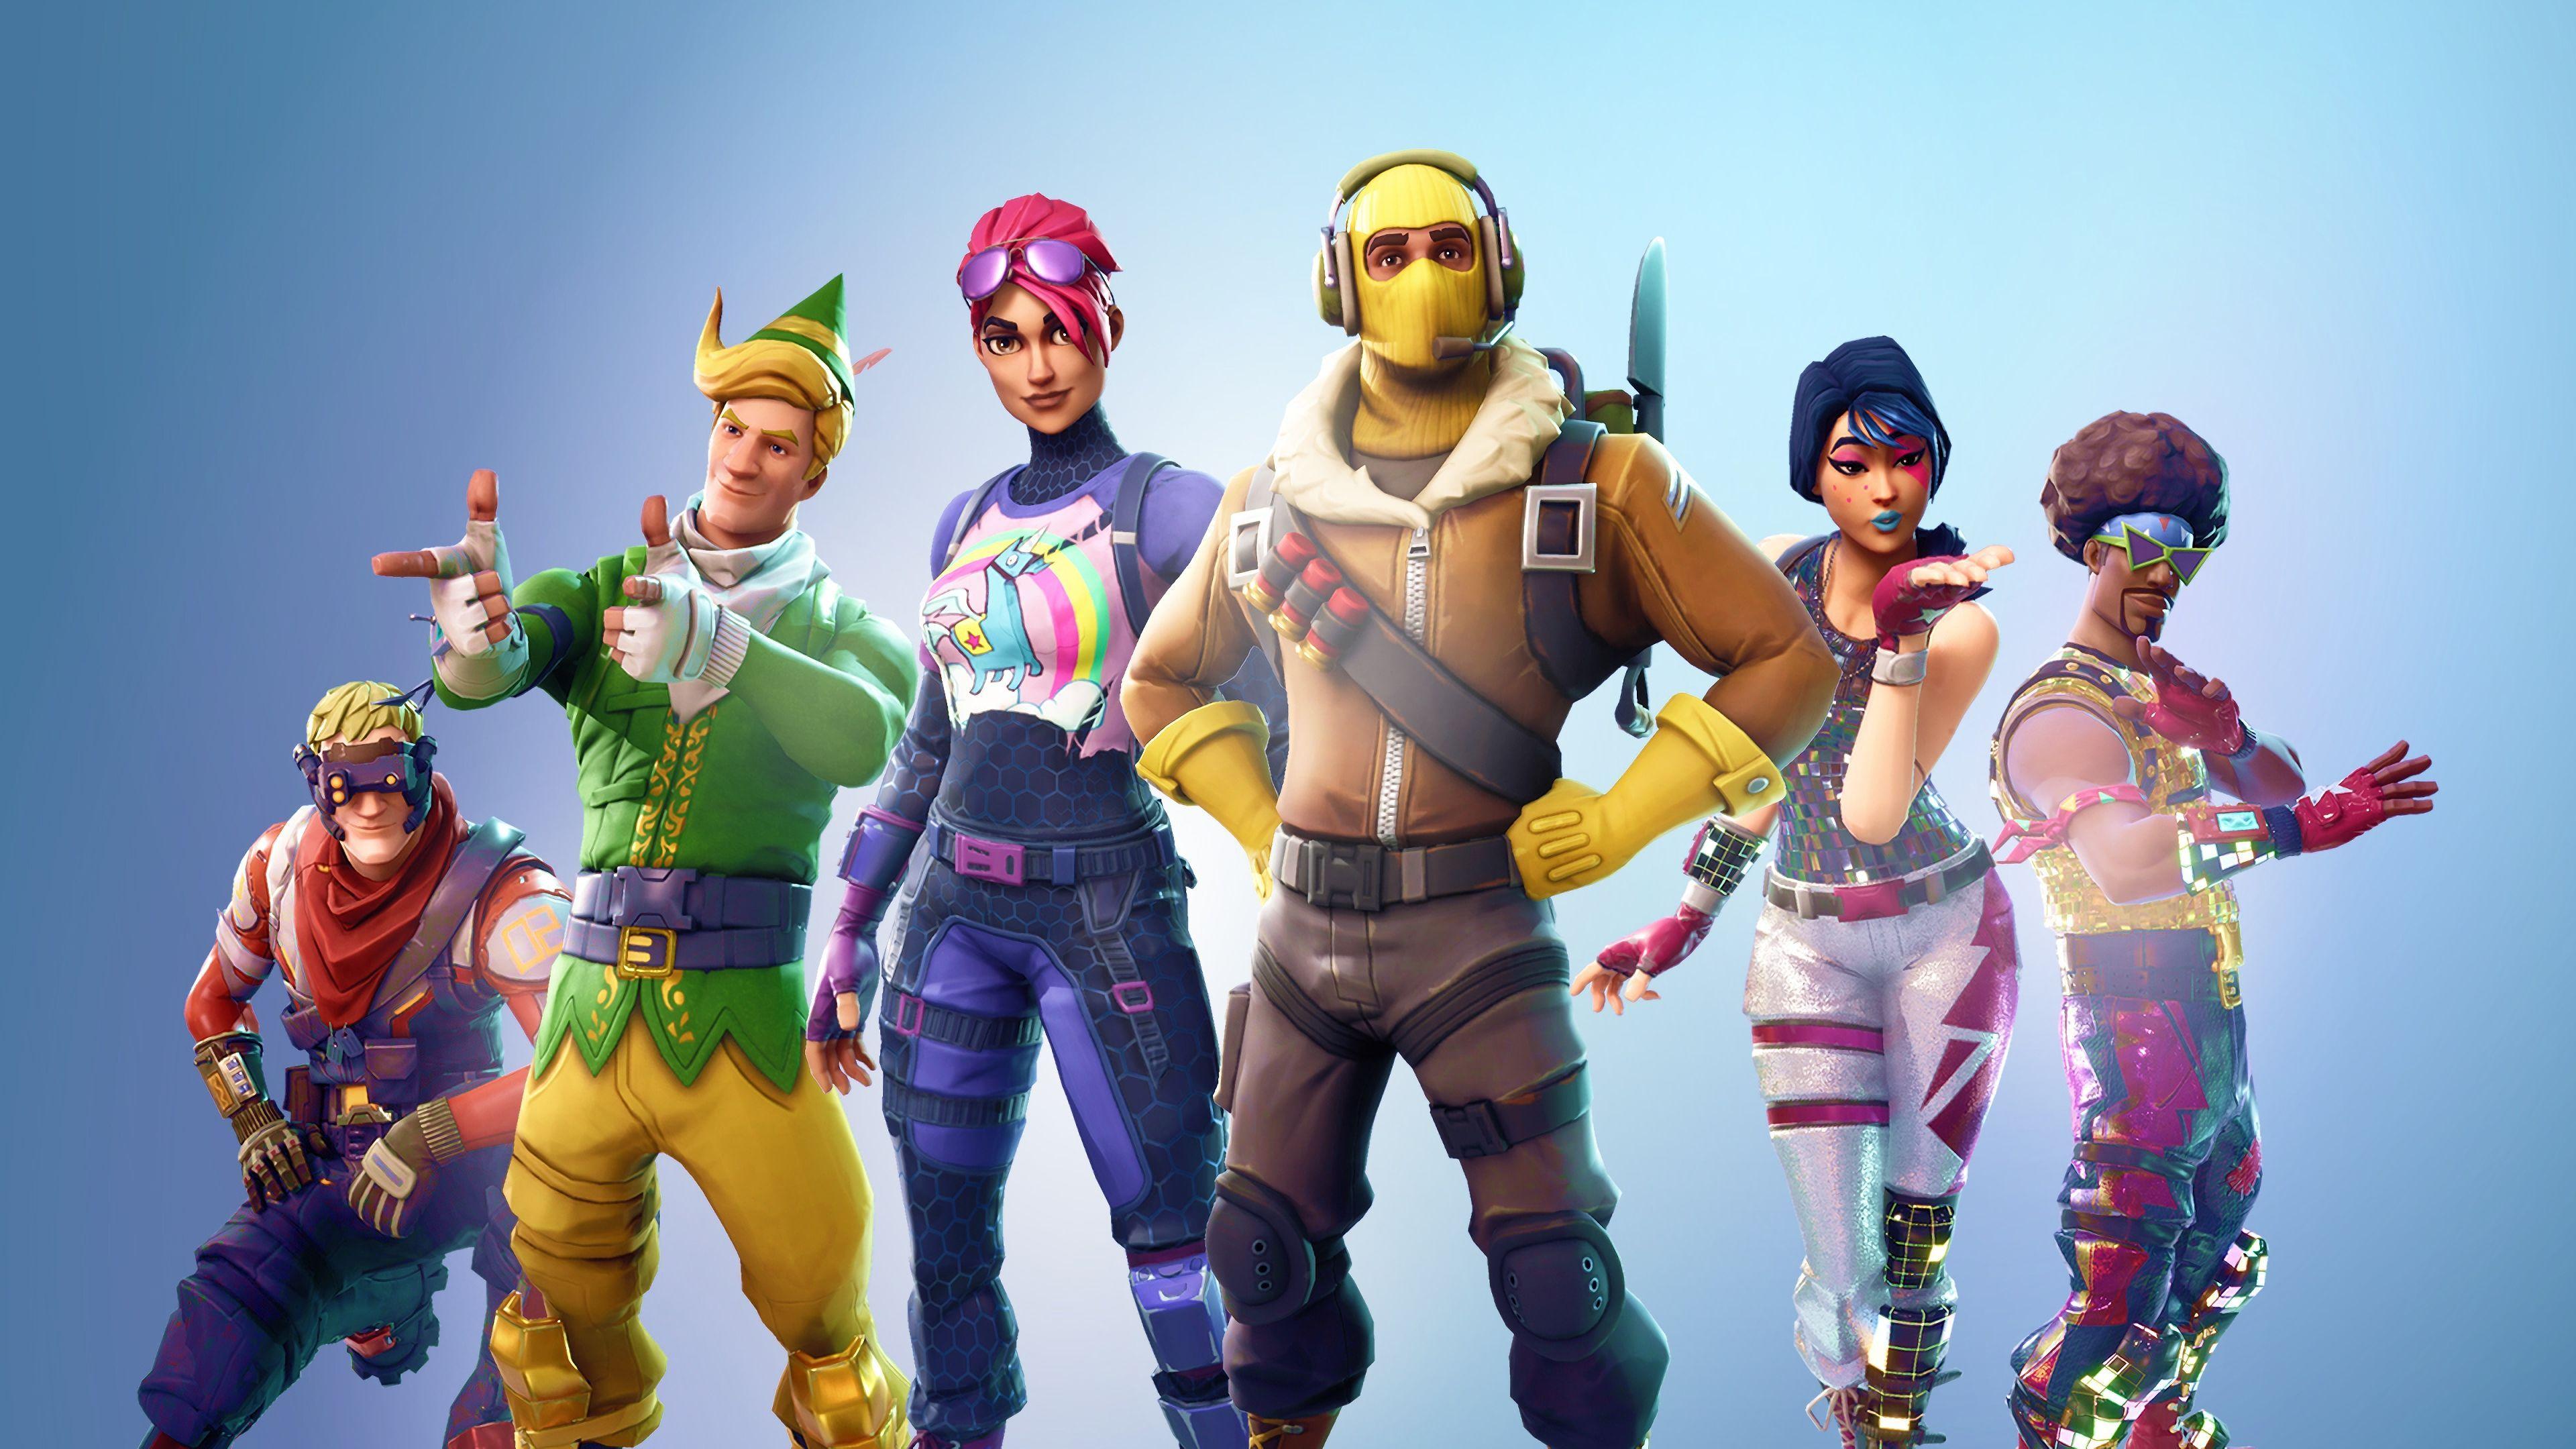 Fortnite is selling free skins for cash, yet again